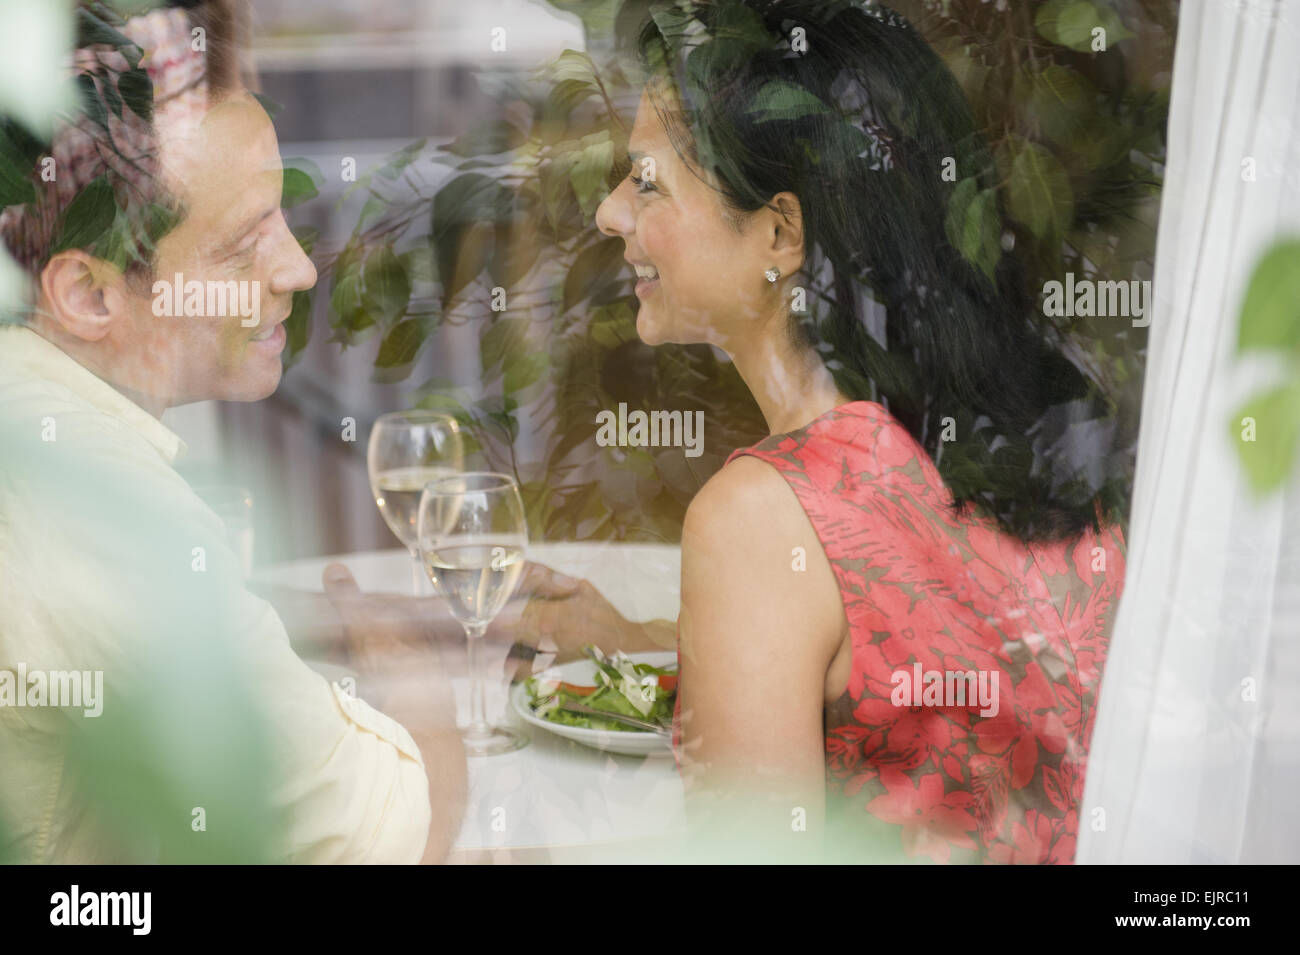 Couple talking in restaurant Banque D'Images